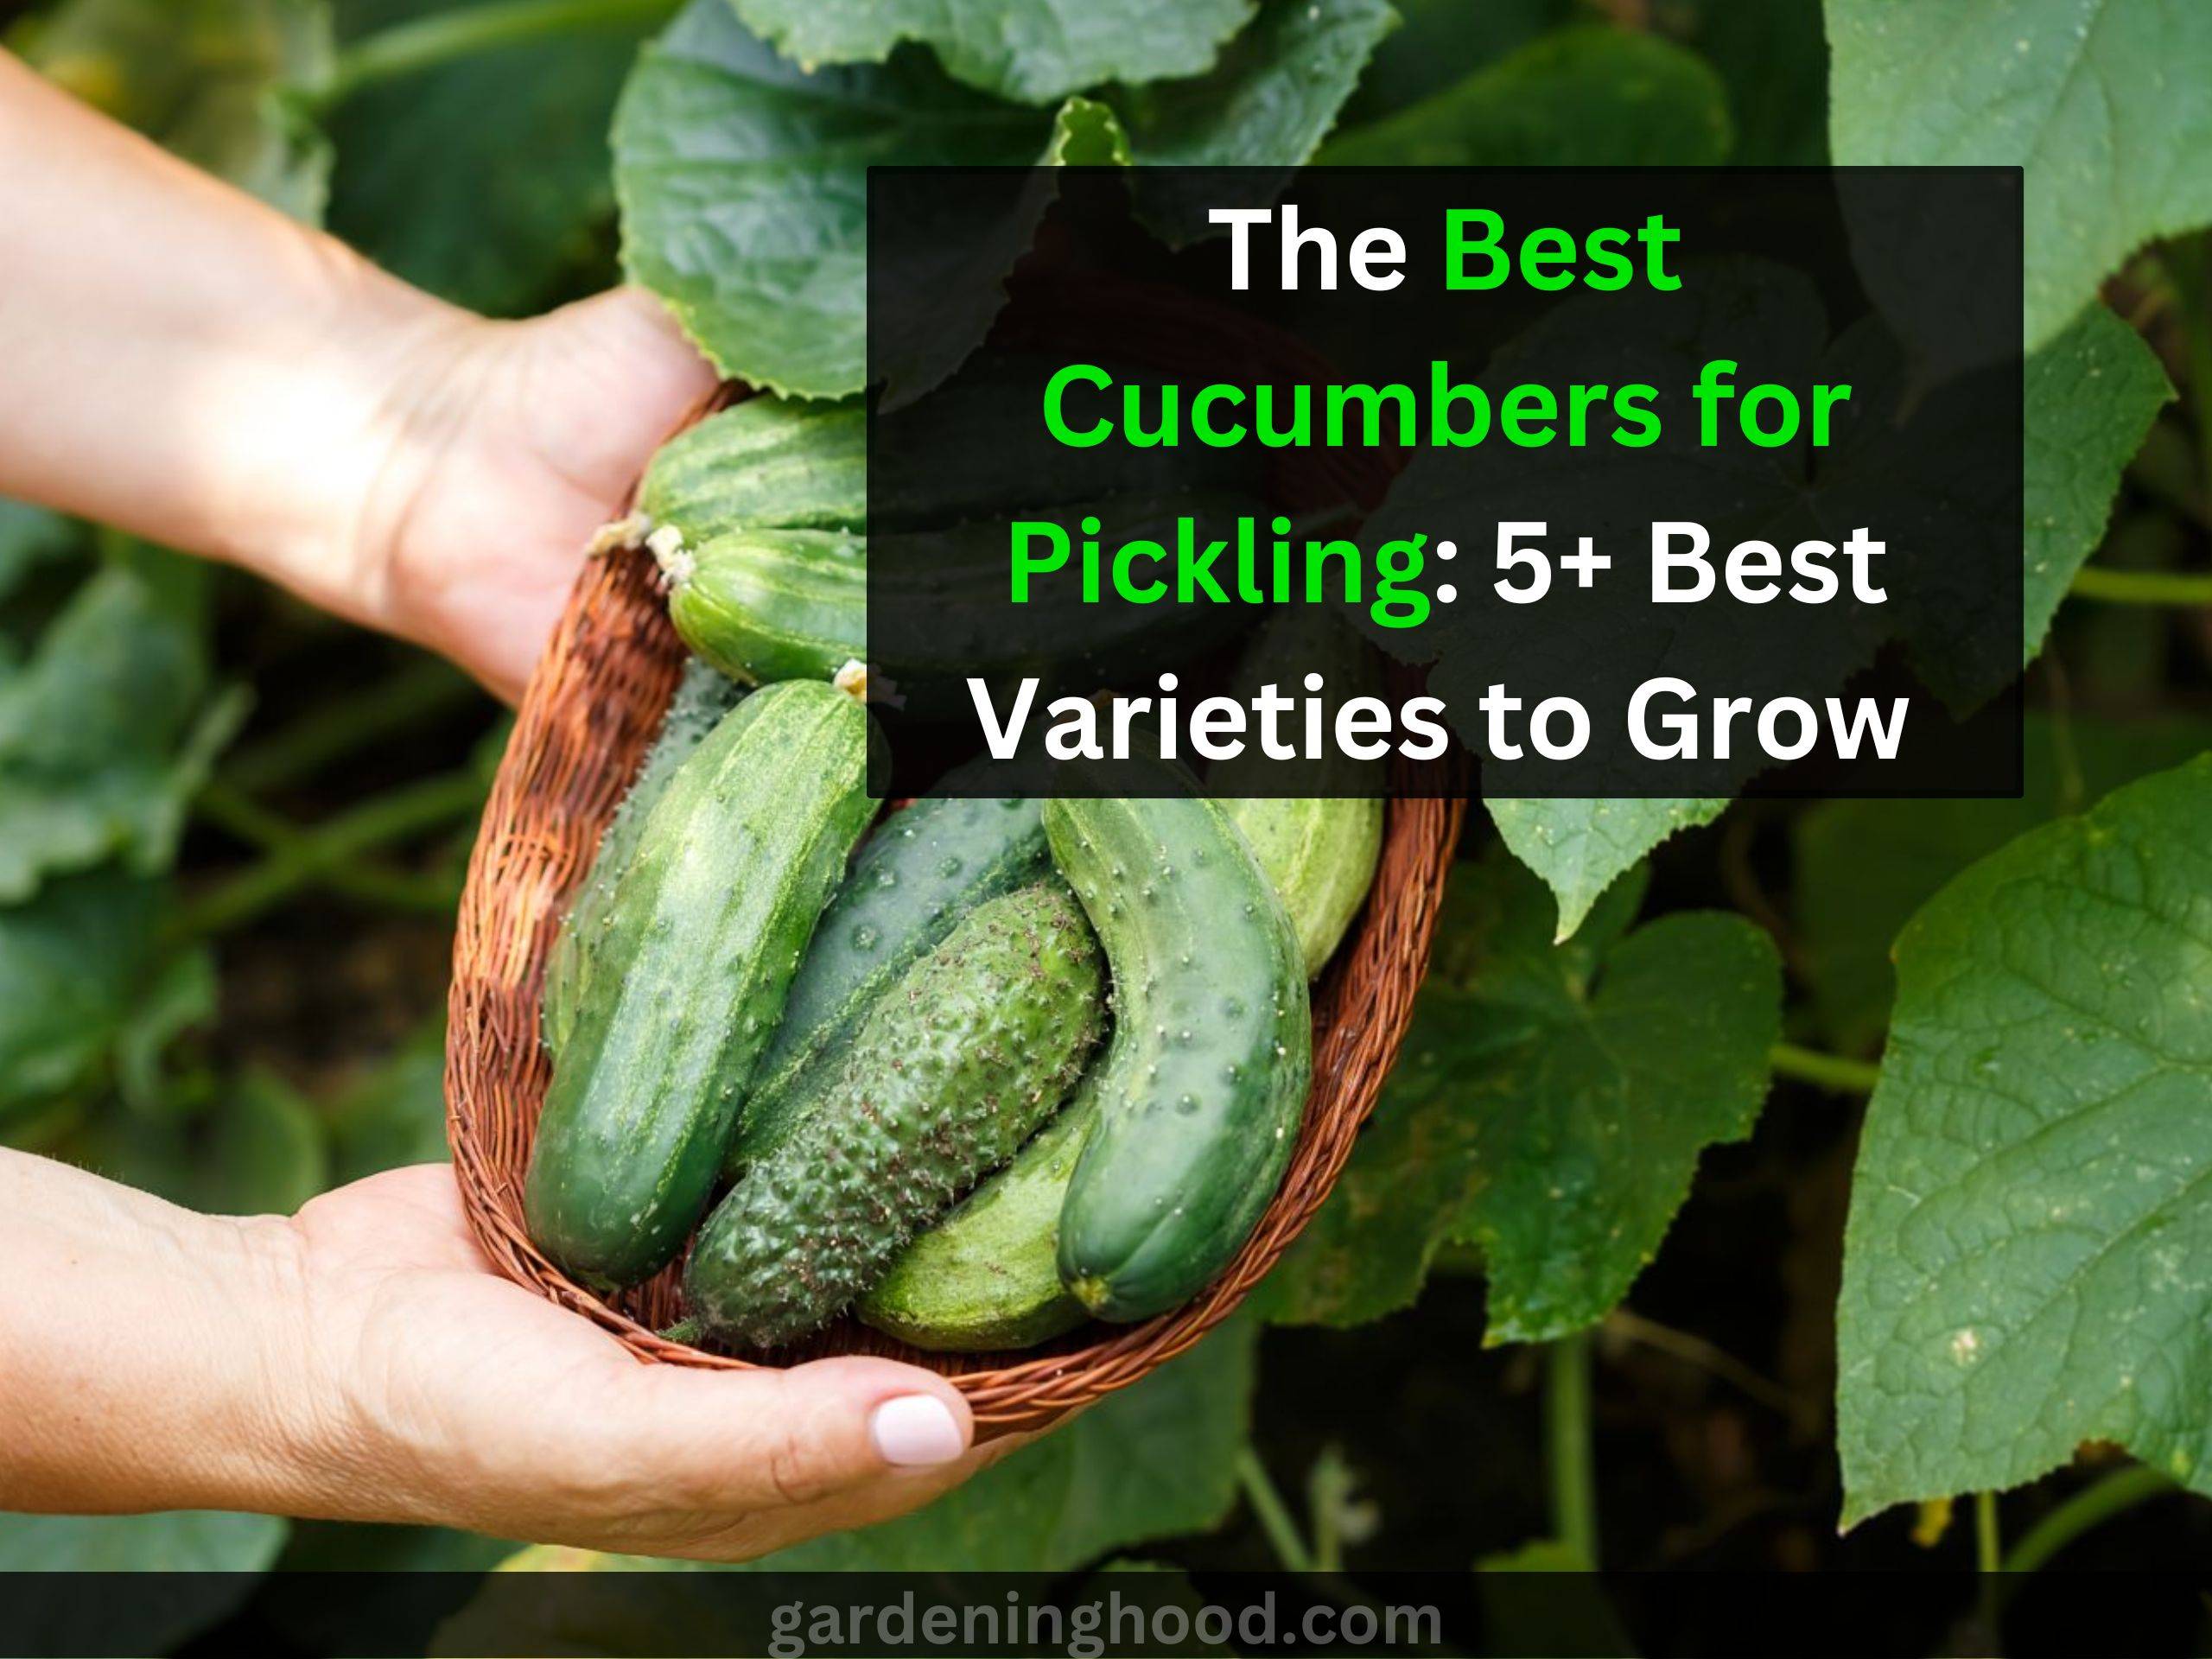 The Best Cucumbers for Pickling: 5+ Best Varieties to Grow